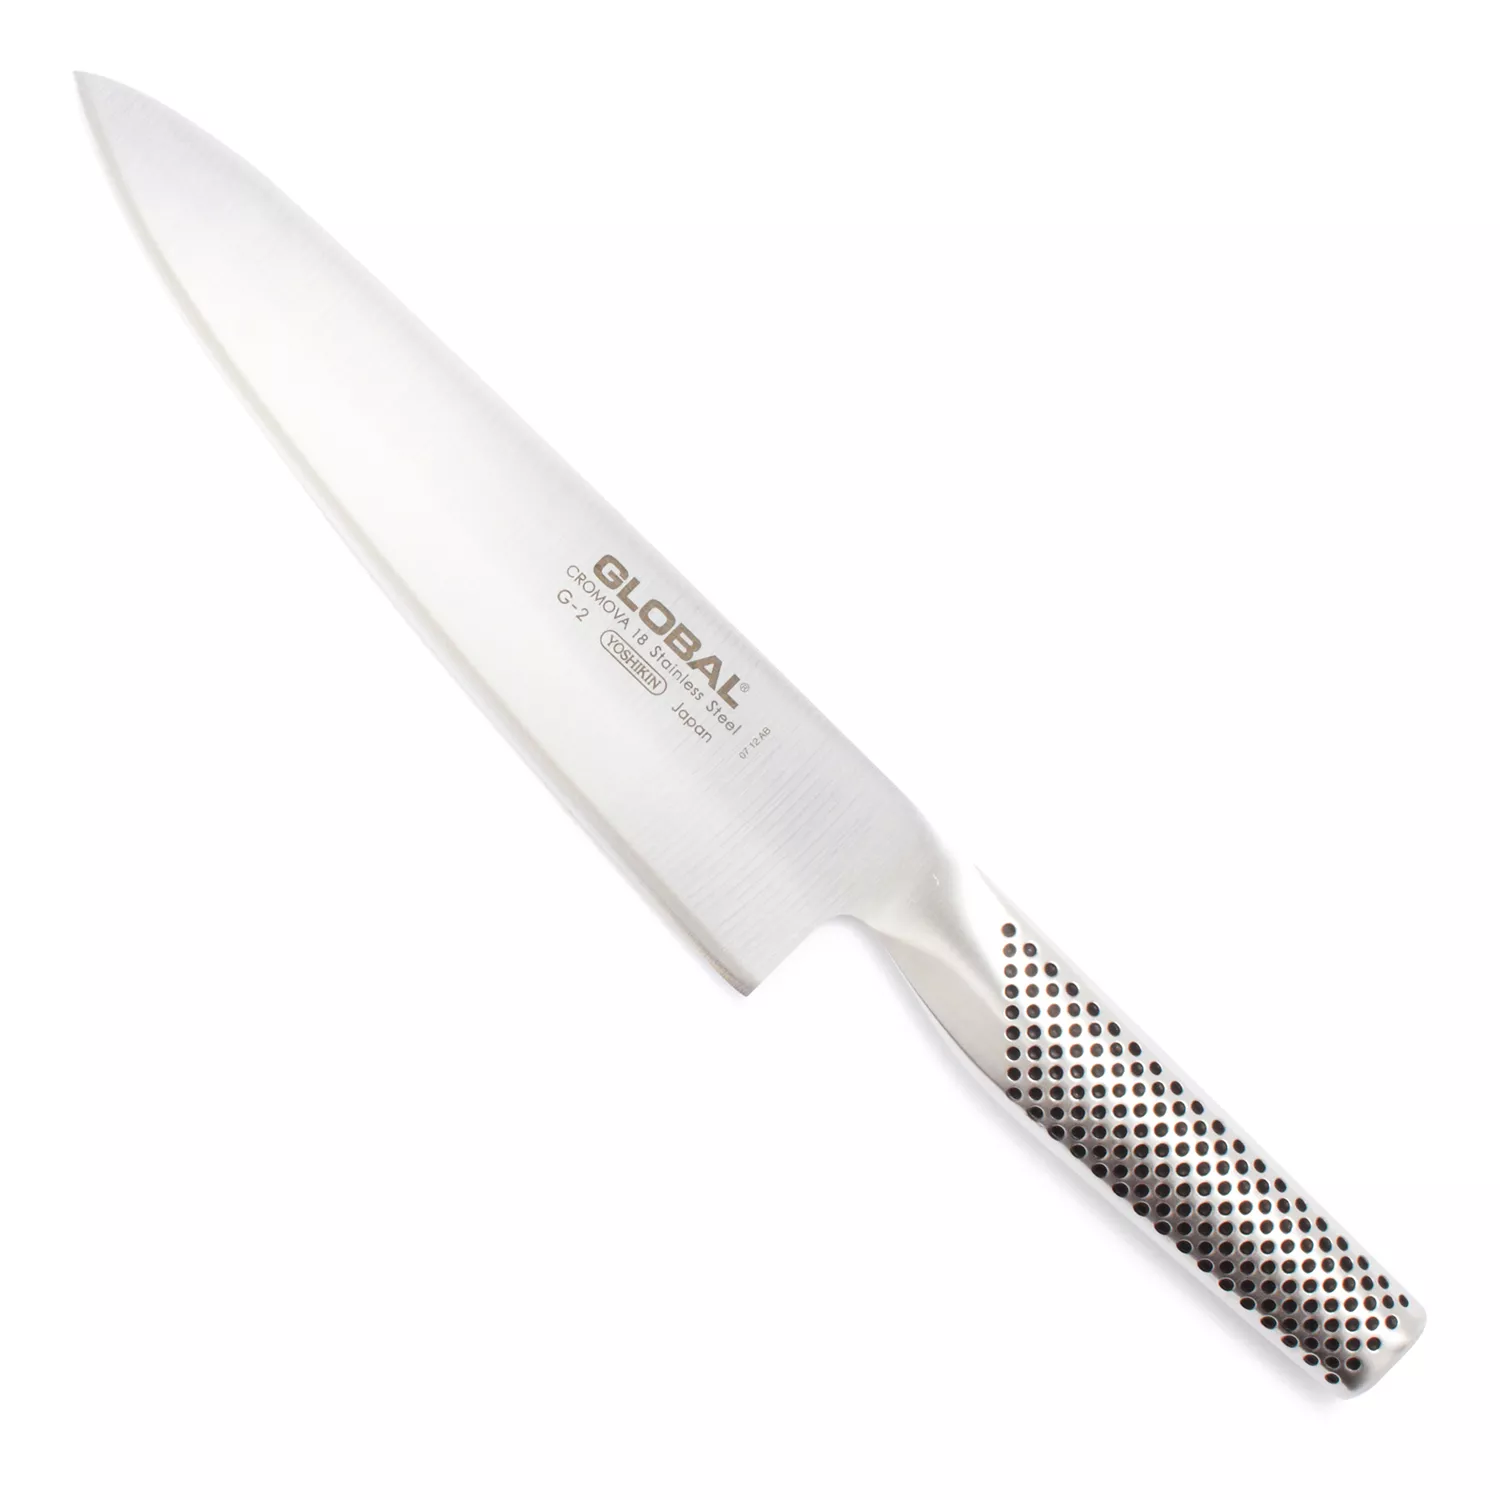 Choice 8 Chef Knife with White Handle